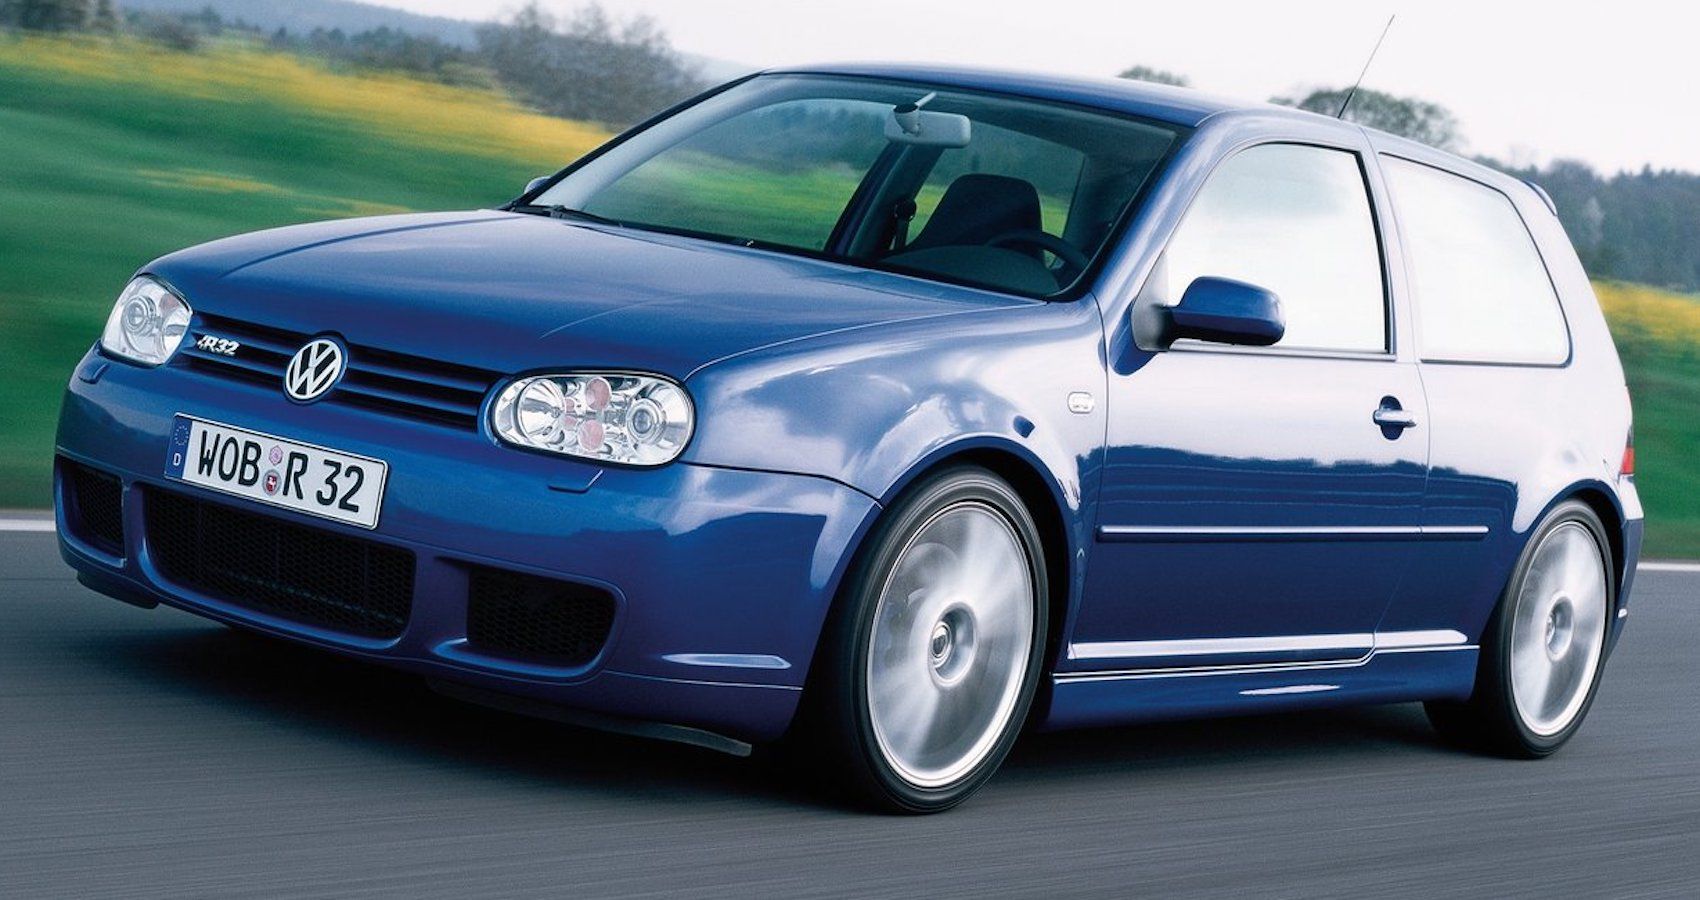 Volkswagen Golf R32 2004 blue car with silver wheels side shot moving in countryside